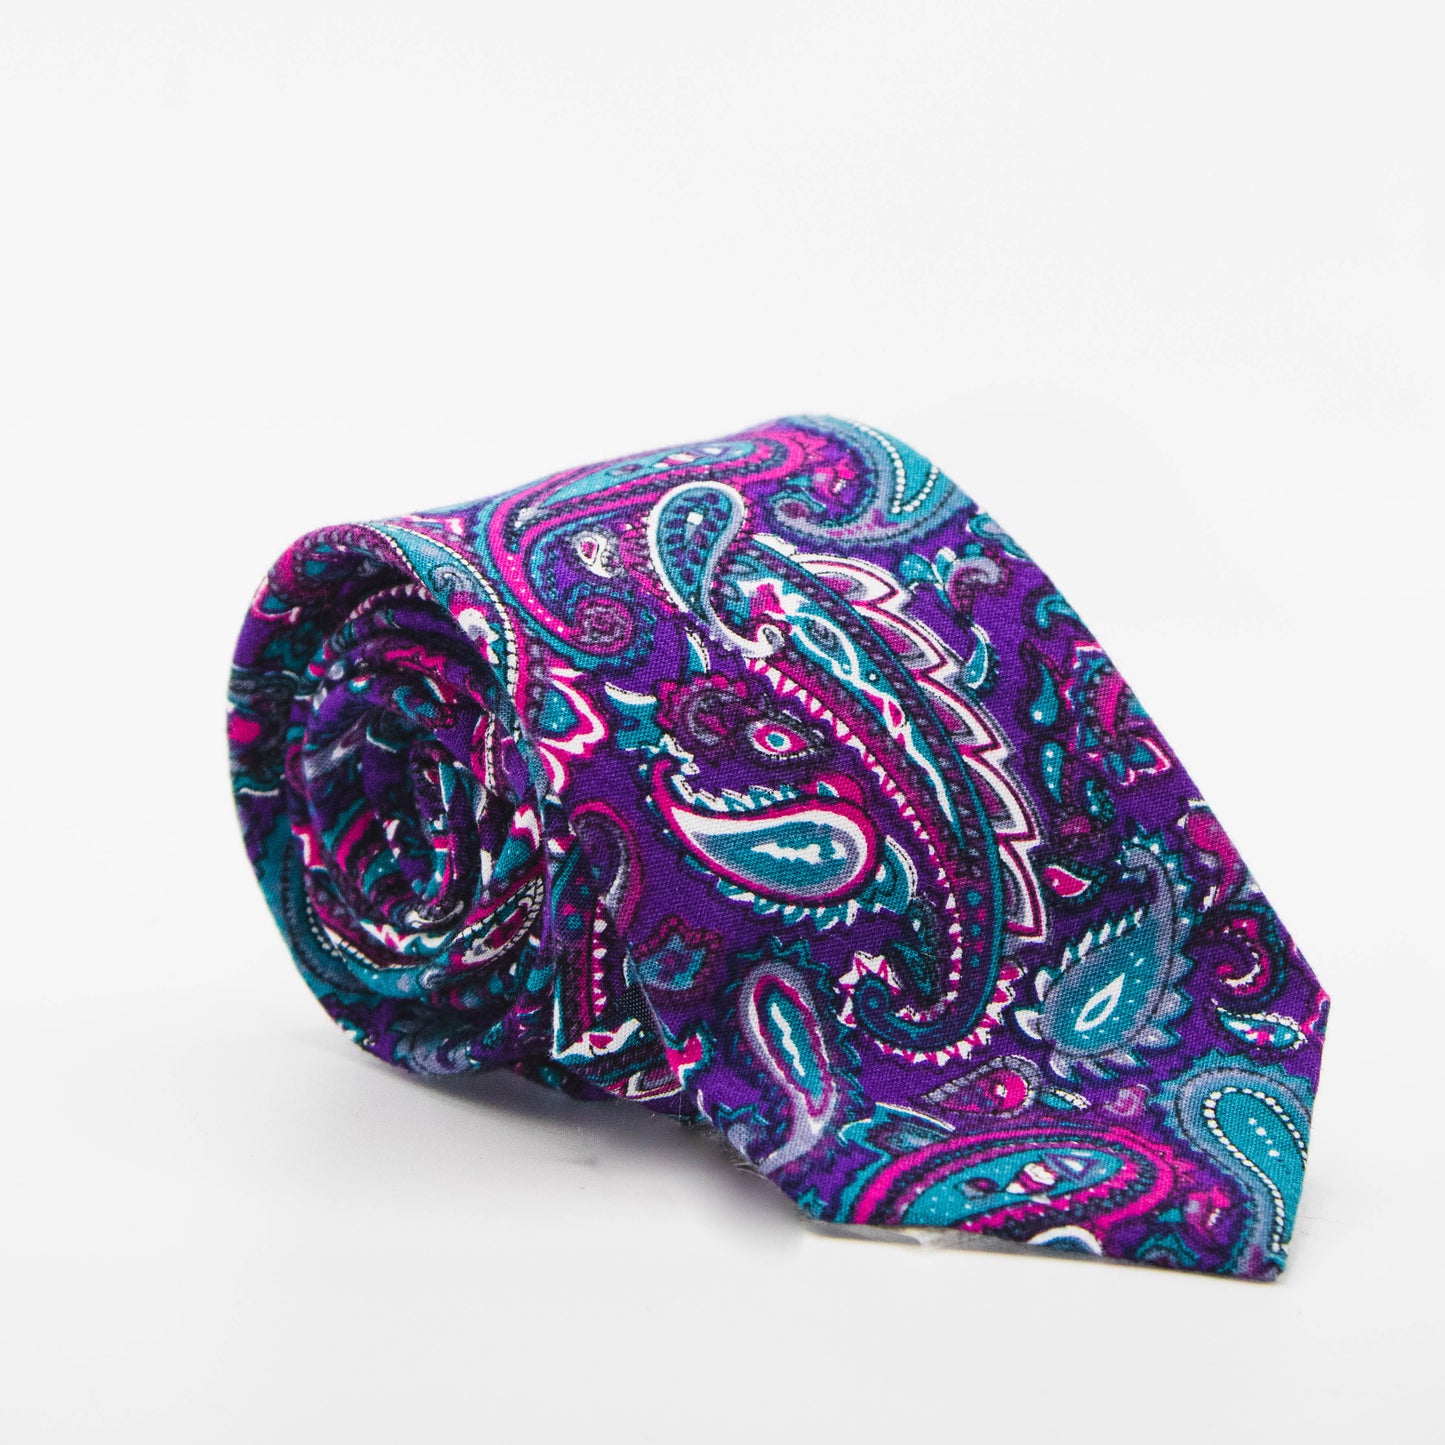 Patterned Tie